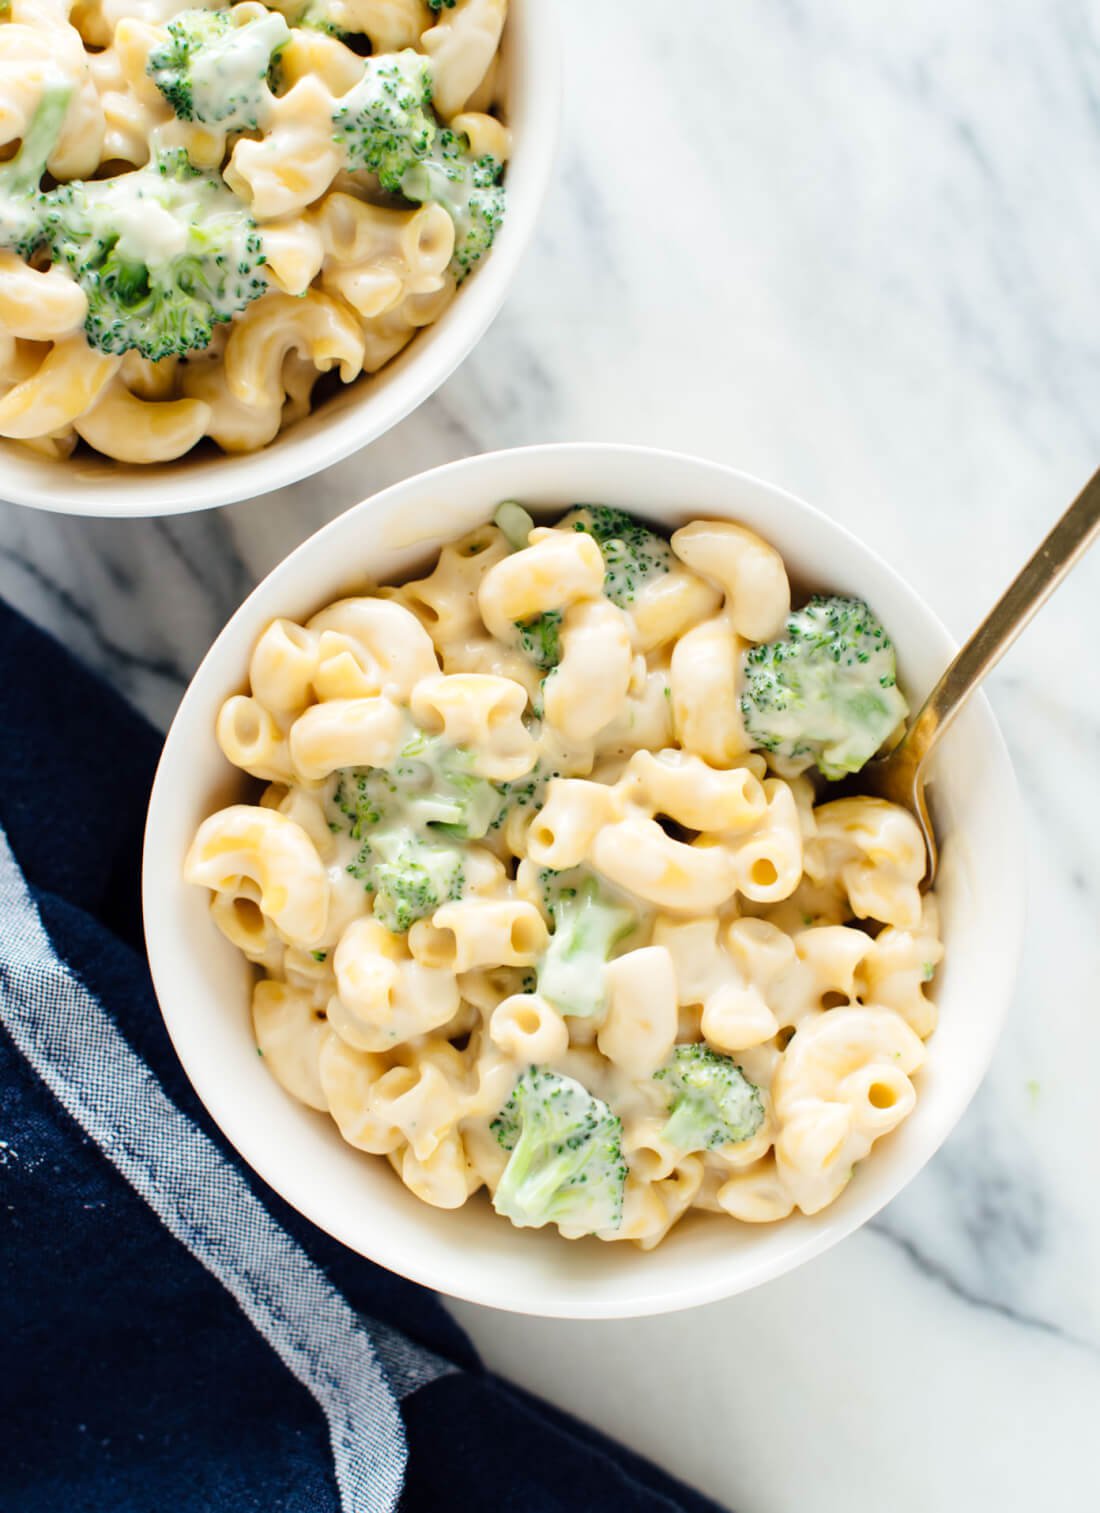 This vegan mac and cheese recipe is incredibly creamy and remarkably cheese-like! Dairy free and easily gluten free. cookieandkate.com